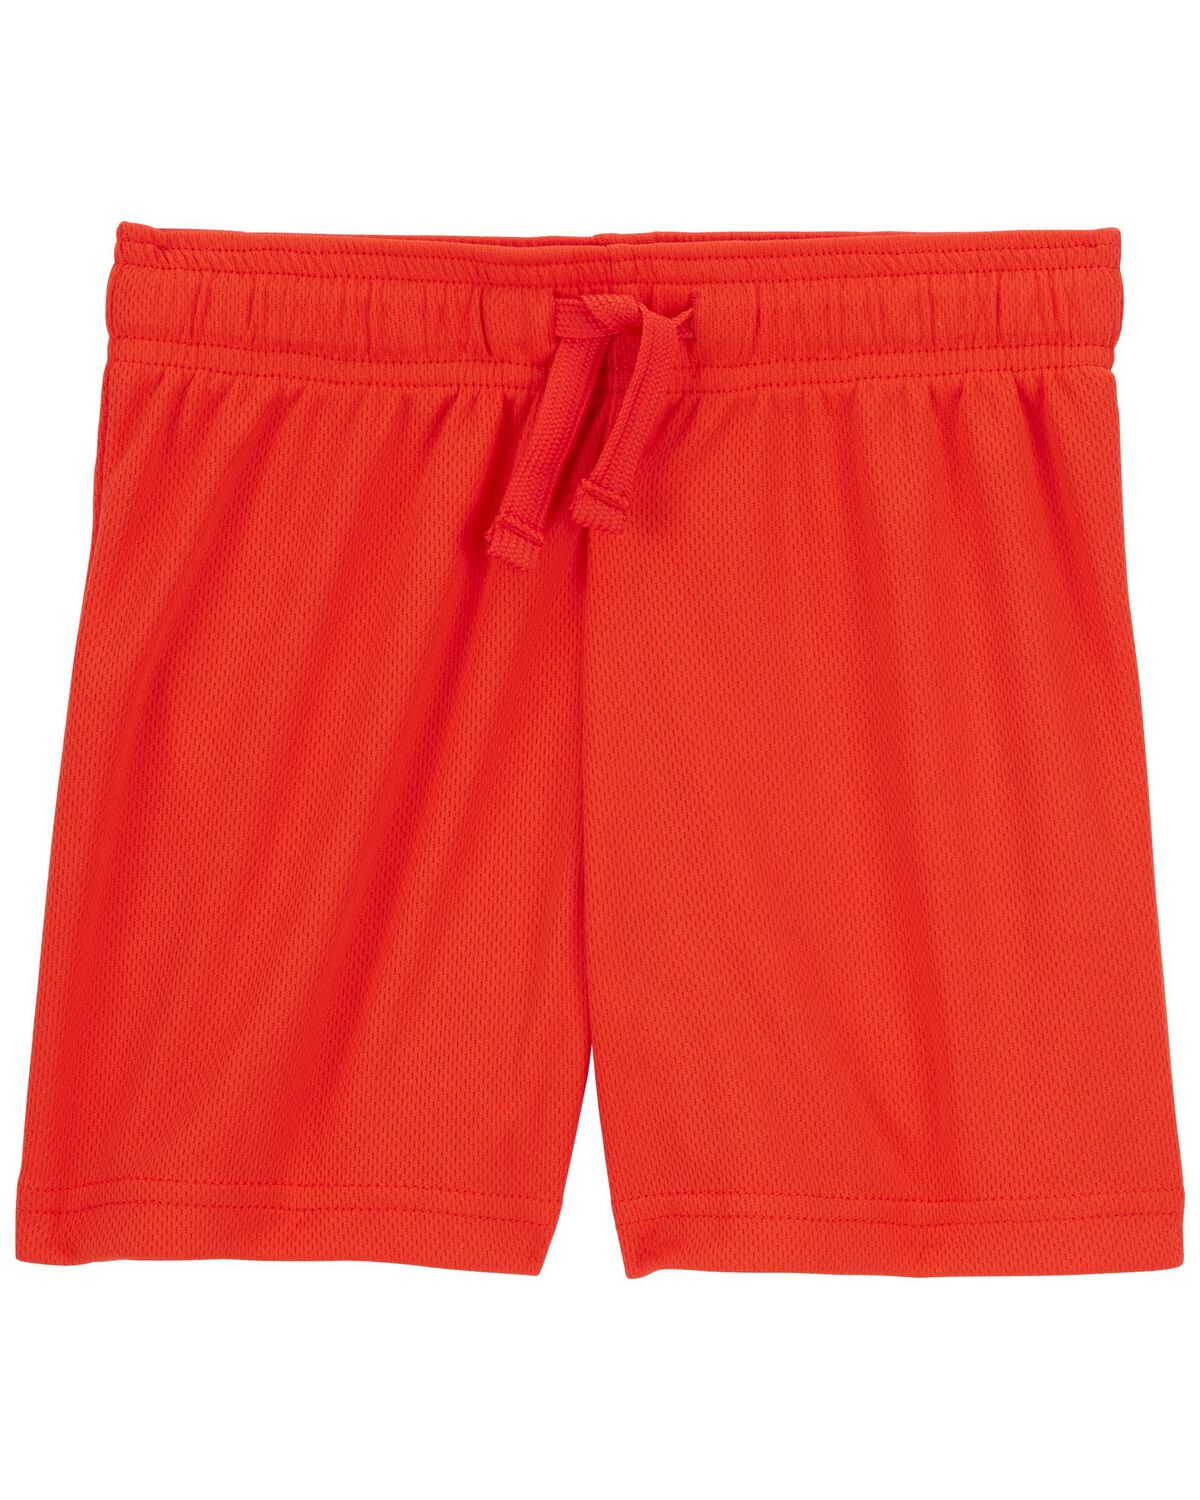 Red Toddler Active Mesh Shorts | carters.com